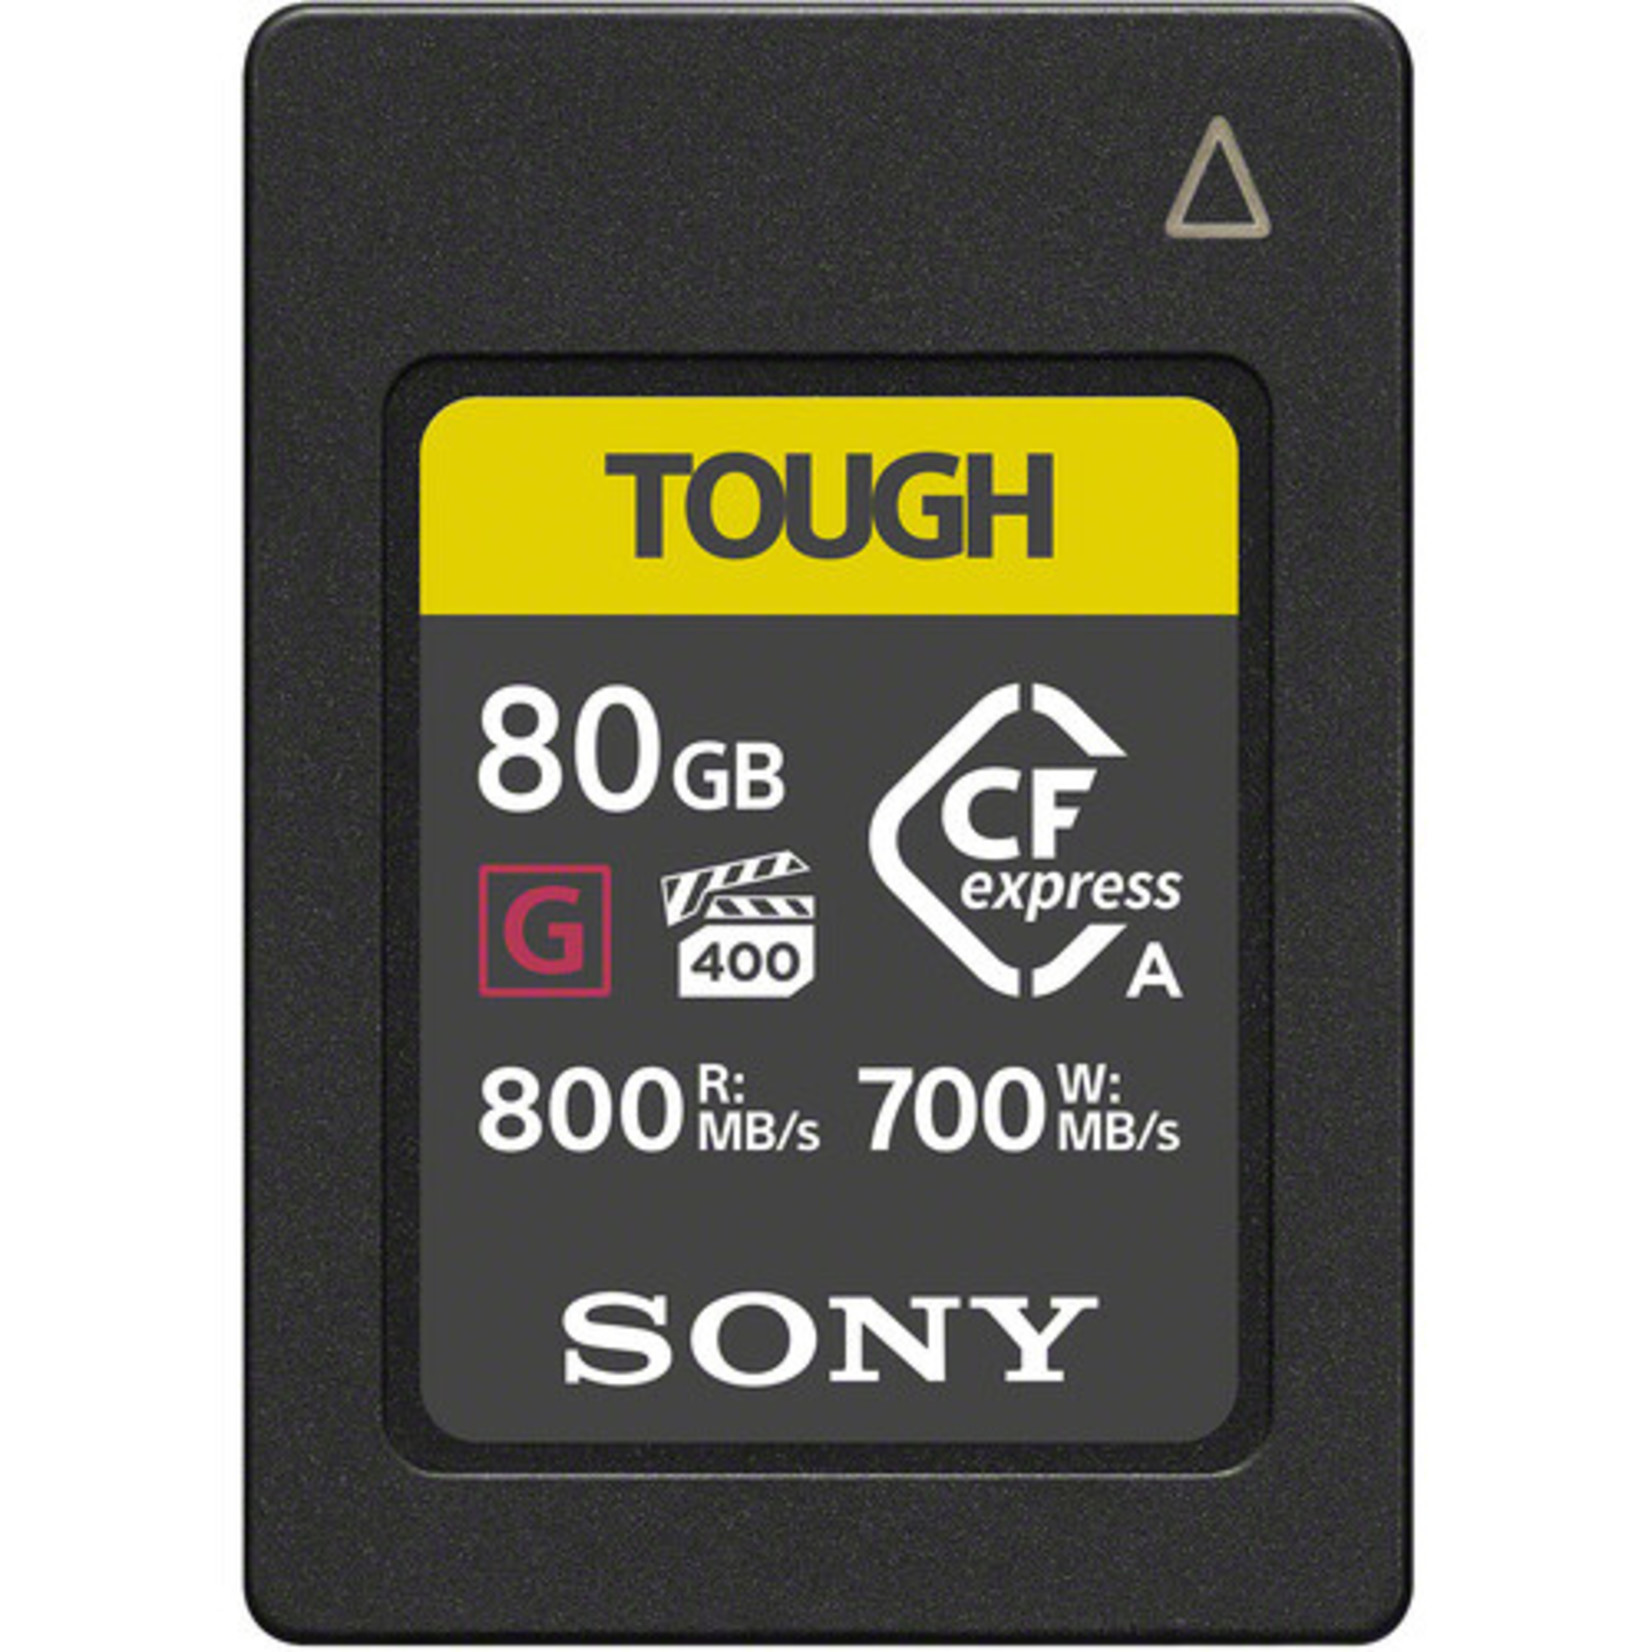 Sony Sony CFexpress Type A TOUGH Memory Cards